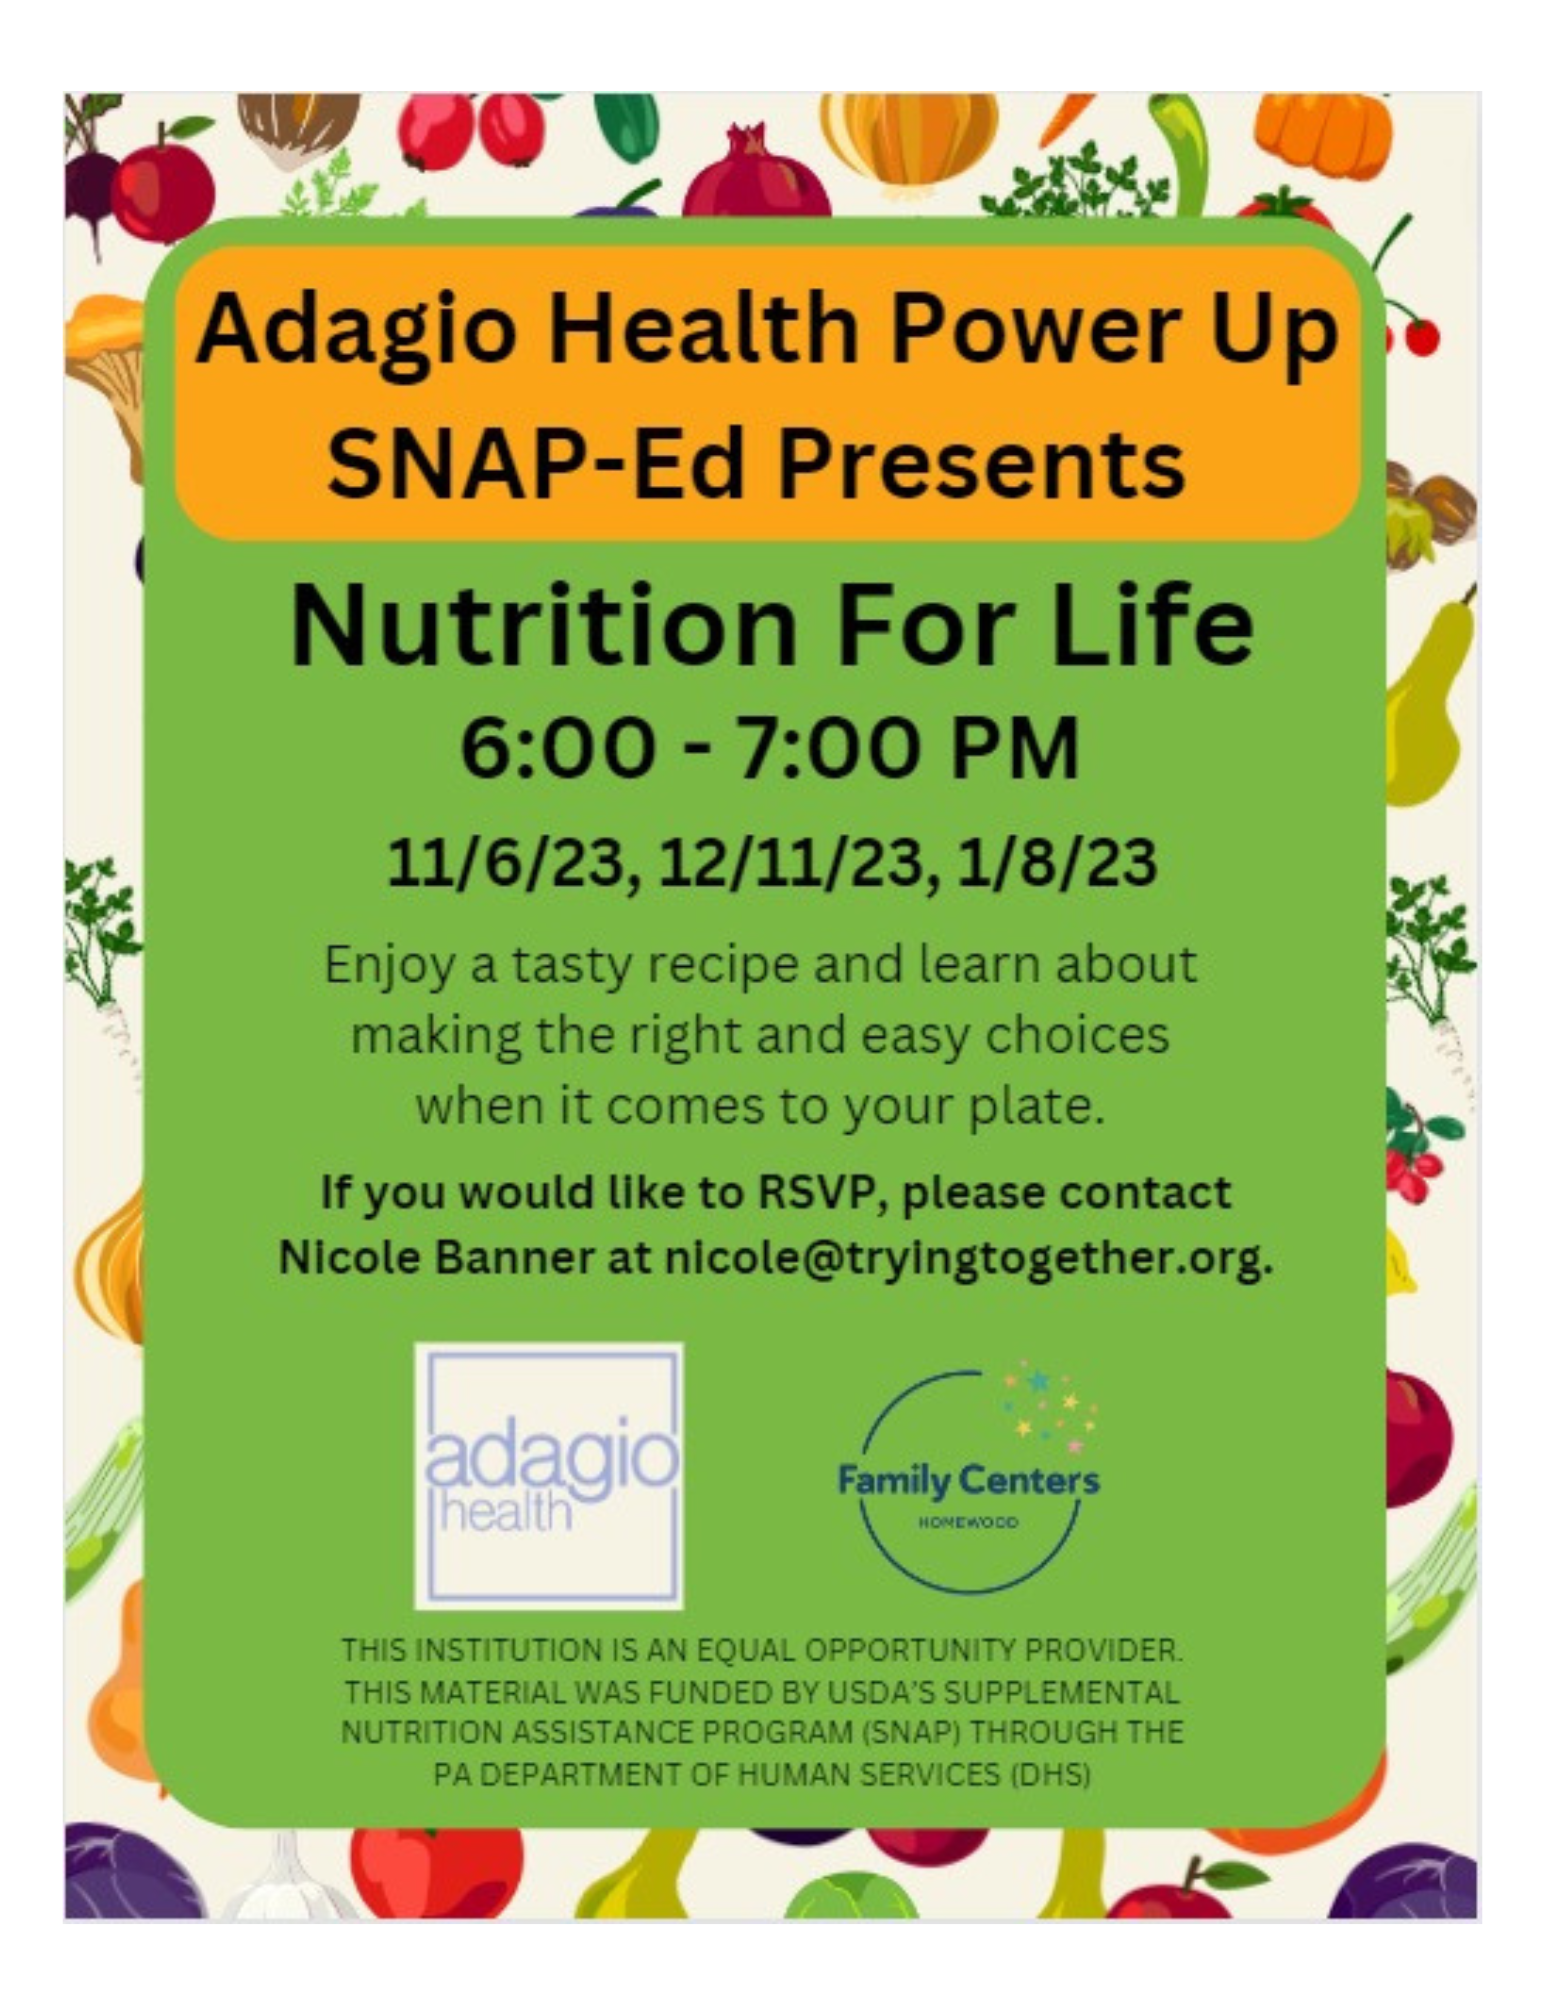 Adagio Health Power Up and SNAP-Ed Nutrition for Life Virtual Cooking Classes